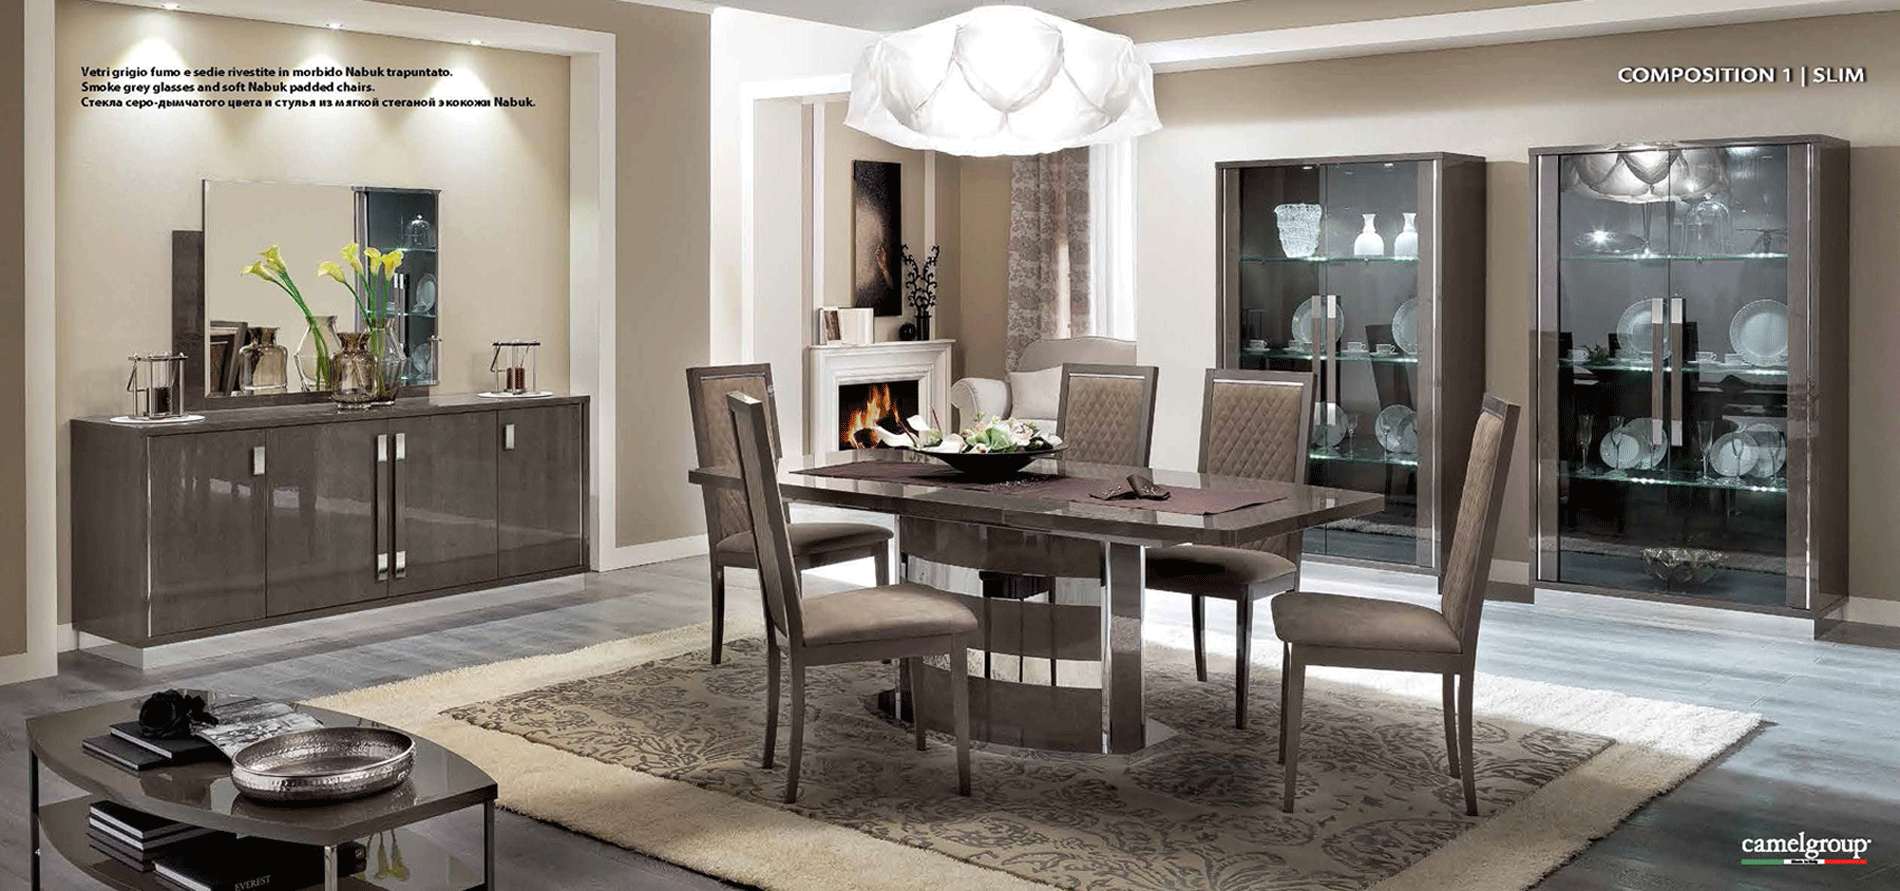 Wallunits Hallway Console tables and Mirrors Platinum Dining Additional Items